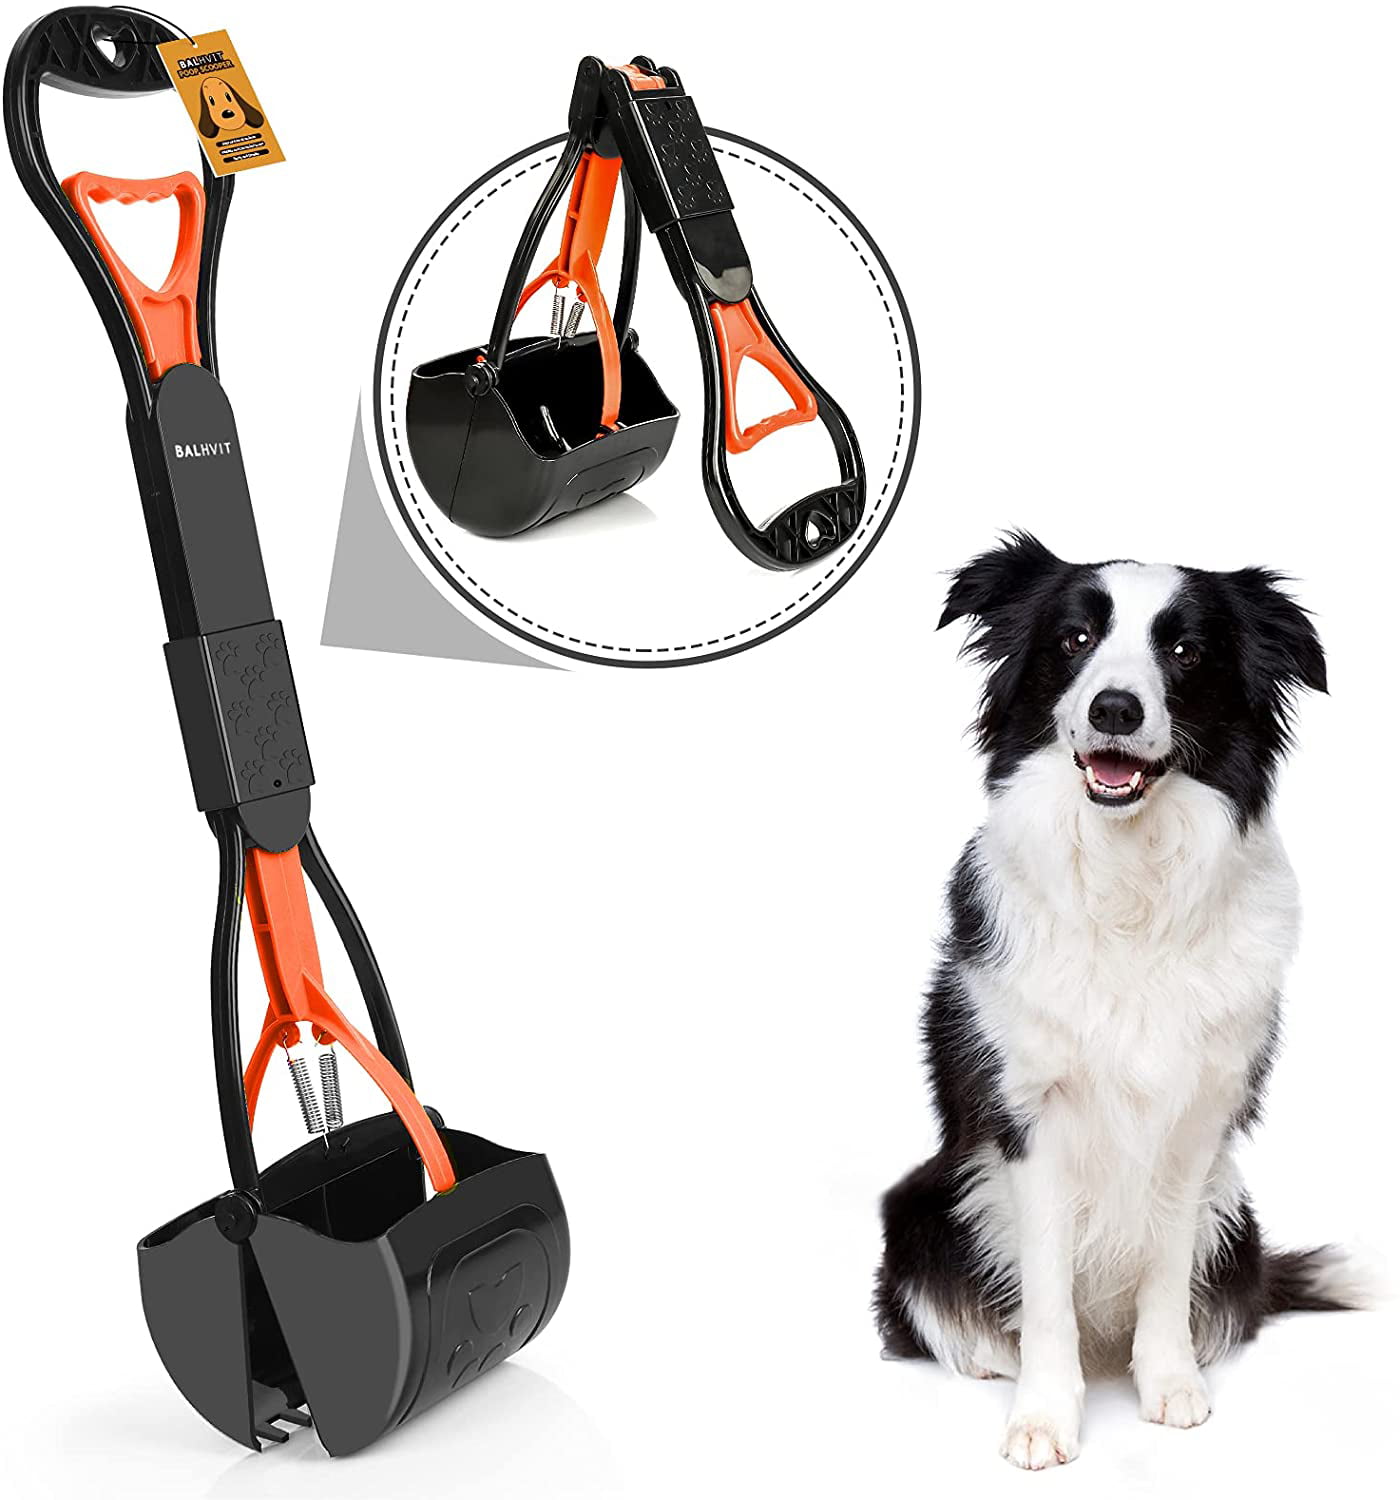 Adjustable Long Handle Metal Tray Rake and Spade Poop Scoop Balhvit Dog Pooper Scooper Great for Lawns & Gravel Pet Waste Removal for Large Dogs and Pets Strong and Sturdy Ergonomic Length 